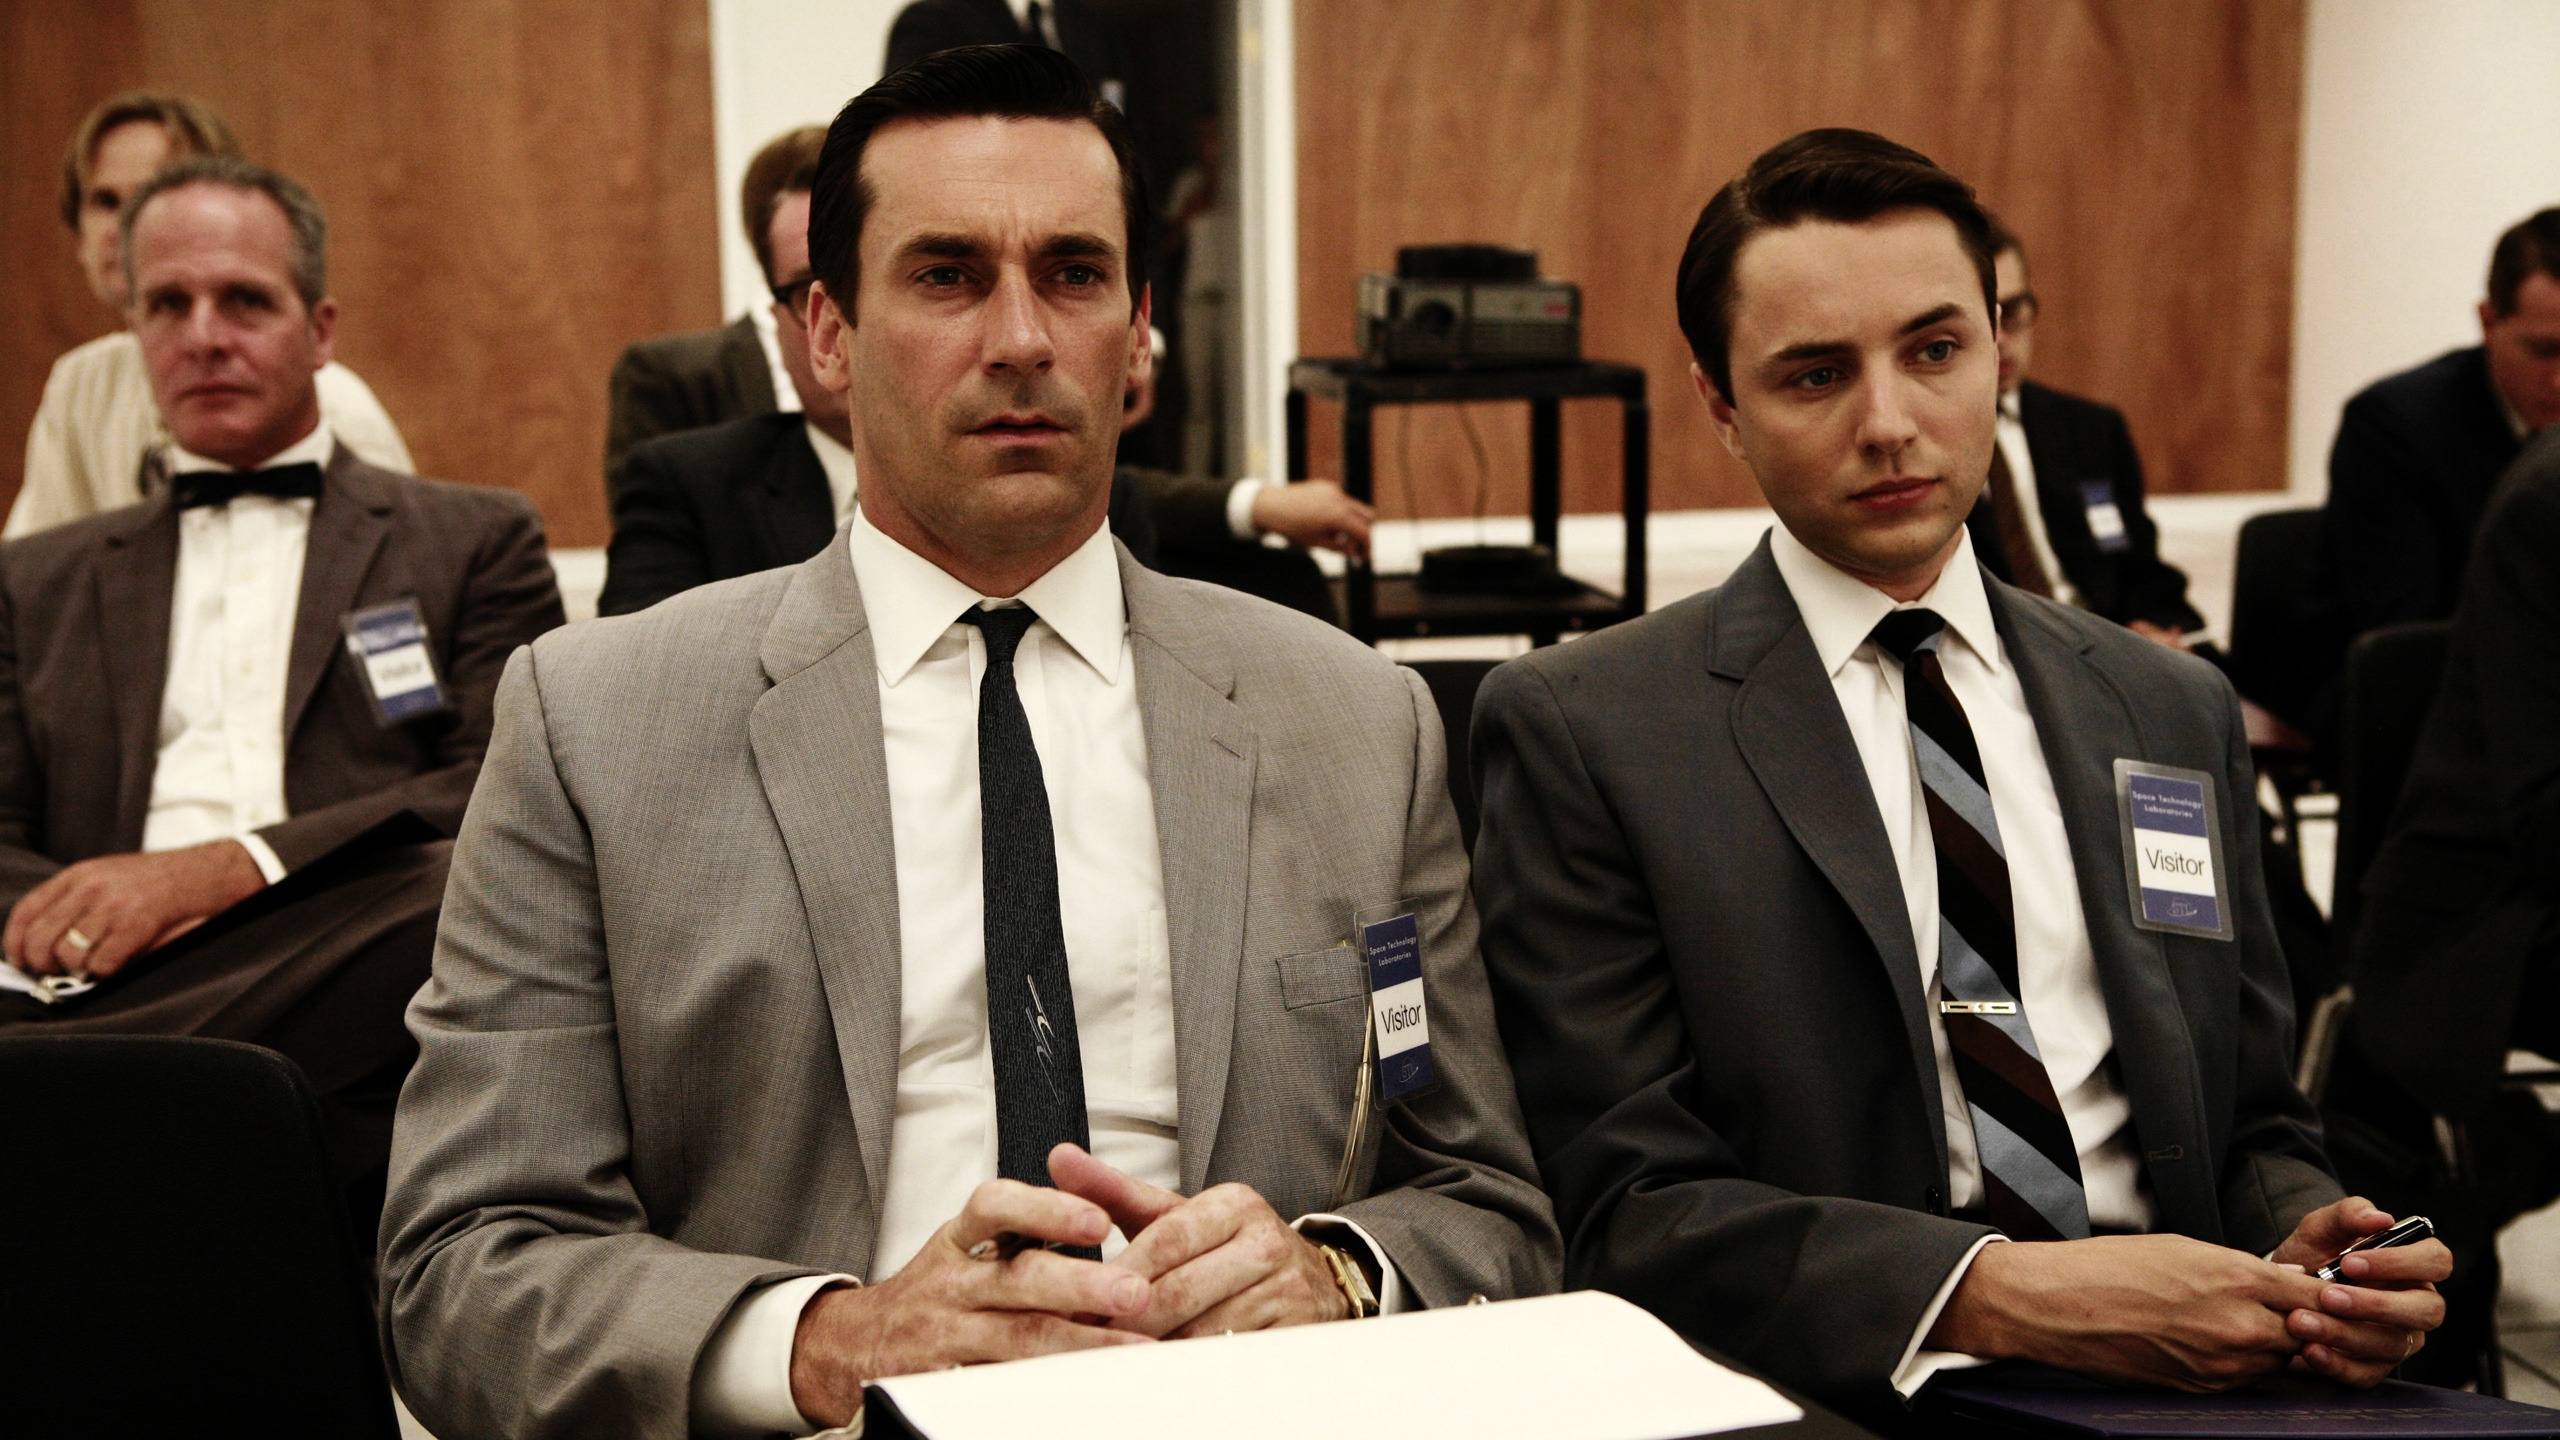 Mad Men - Don and Pete for 2560x1440 HDTV resolution